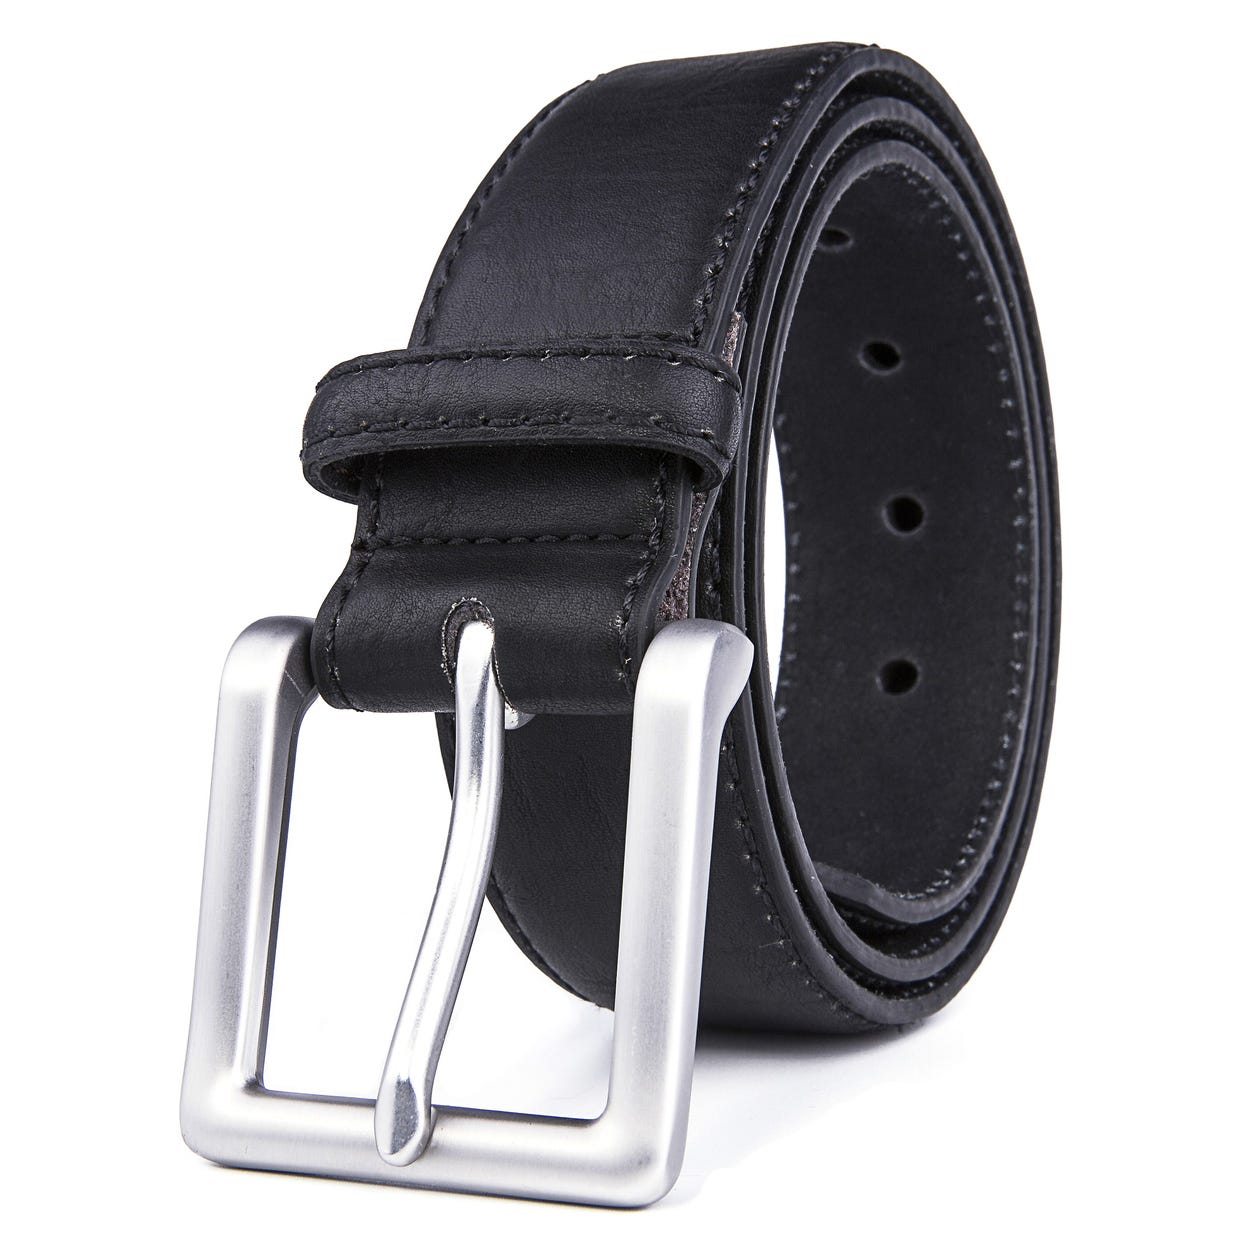 A rolled-up black leather belt with a silver metal buckle.